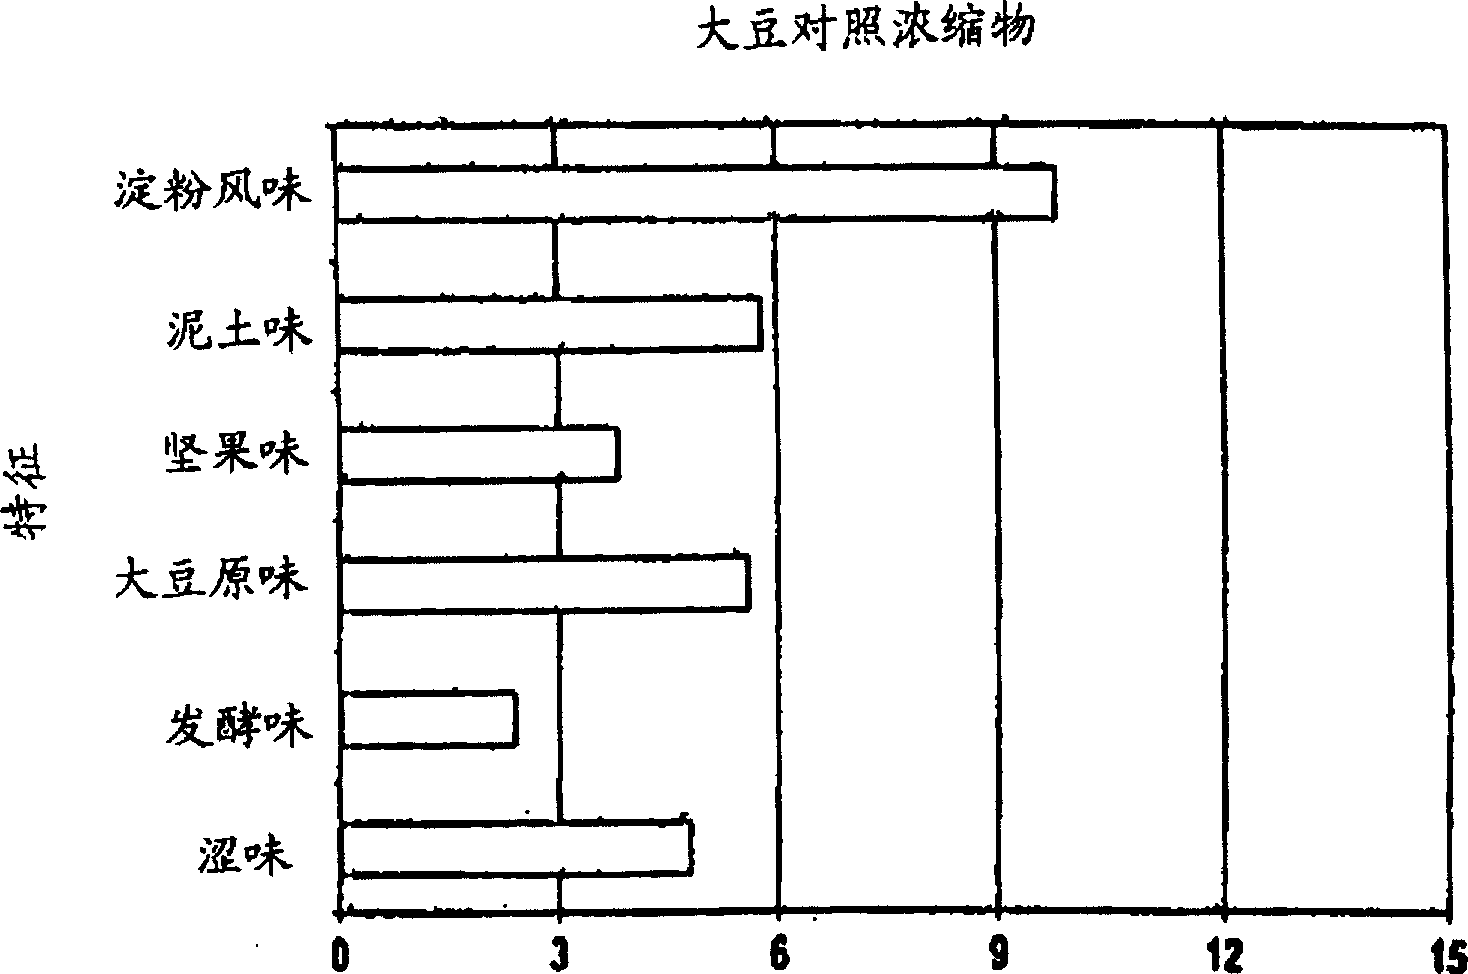 Method of deflavoring soy-derived materials